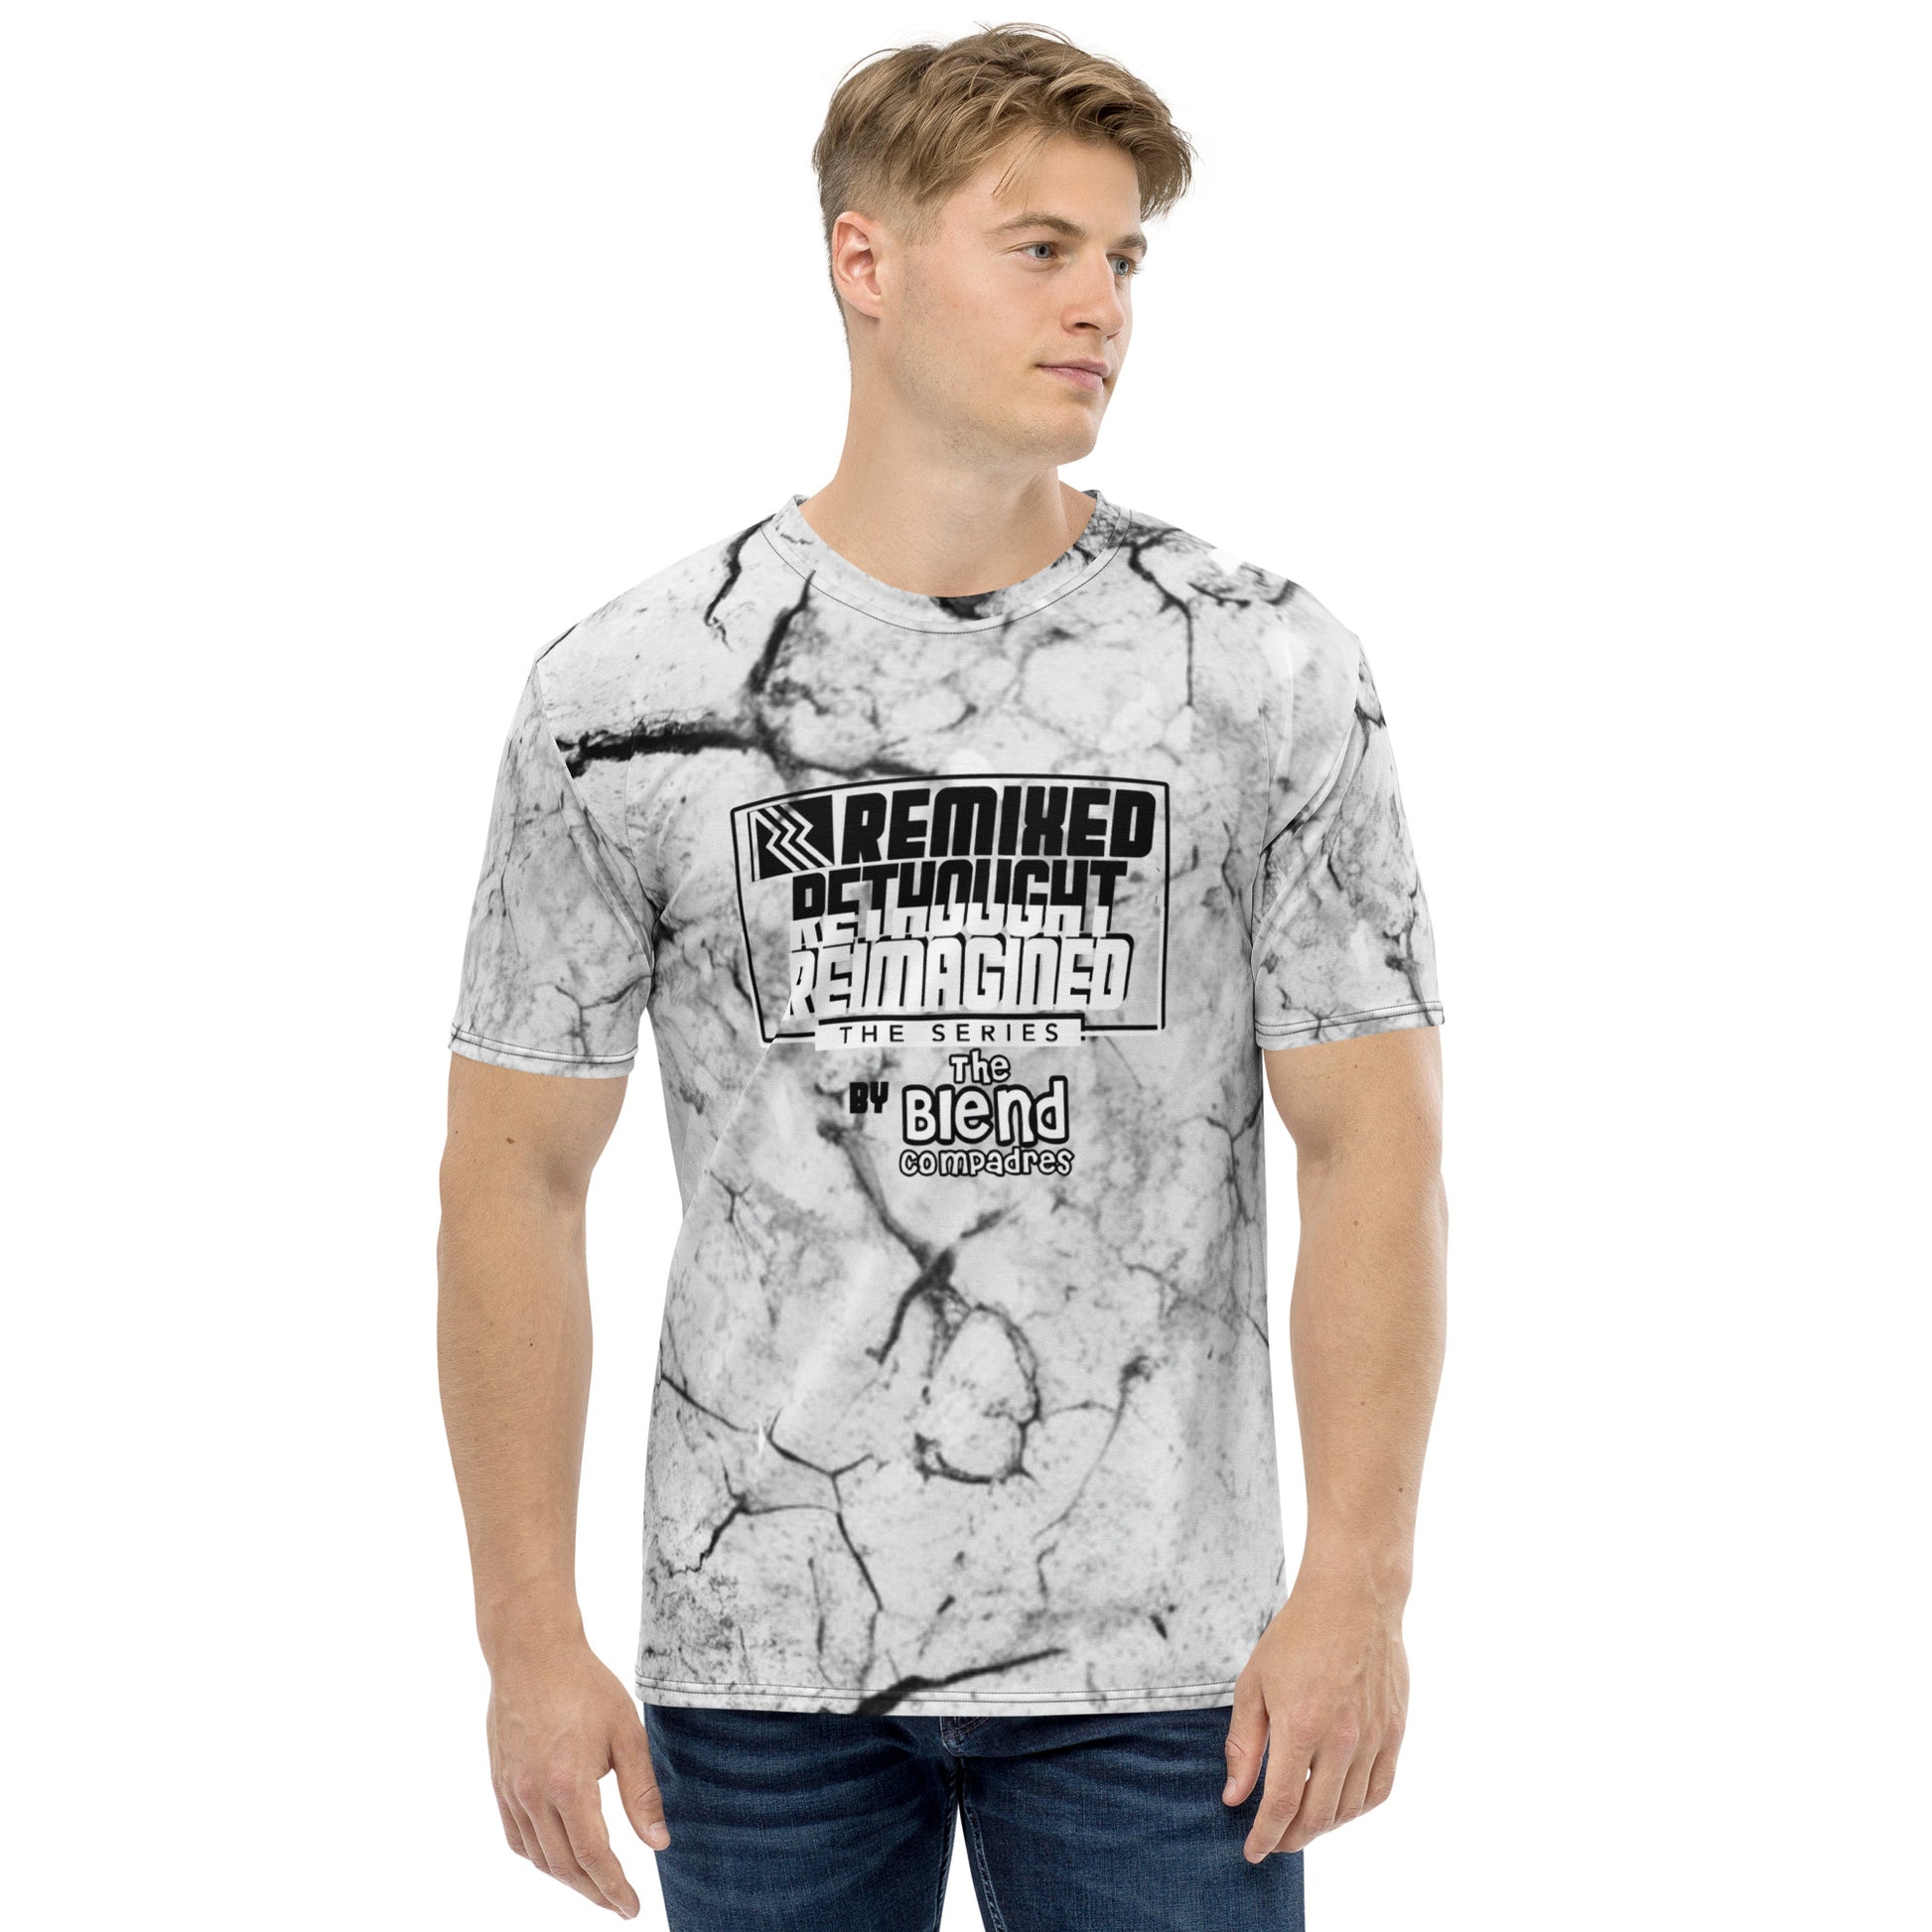 The Blend Compadres R3 Men's t-shirt - Another Bodega